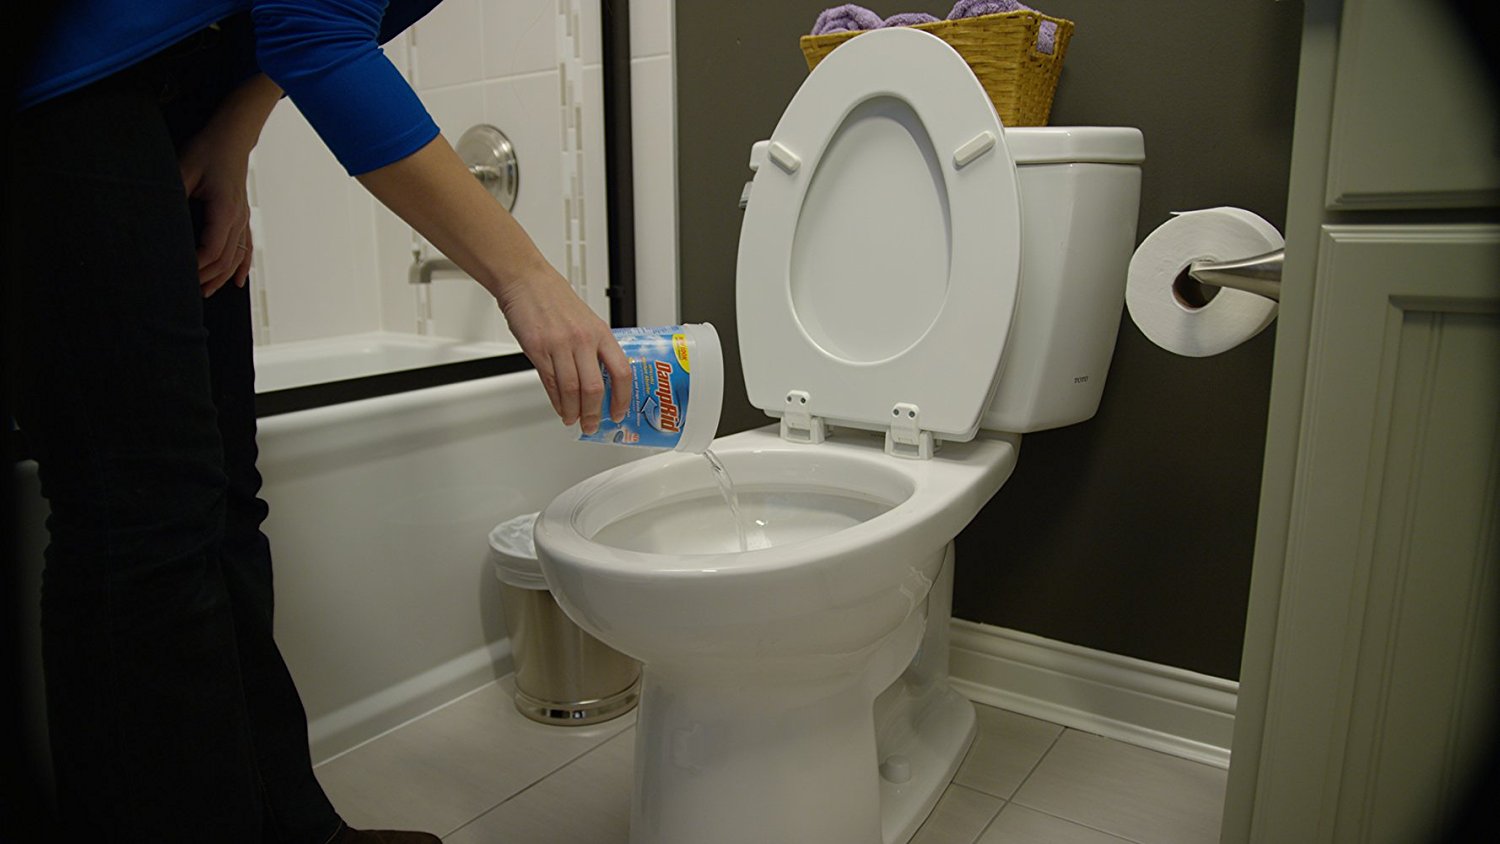 Dumping Damp Rid Water Into Toilet